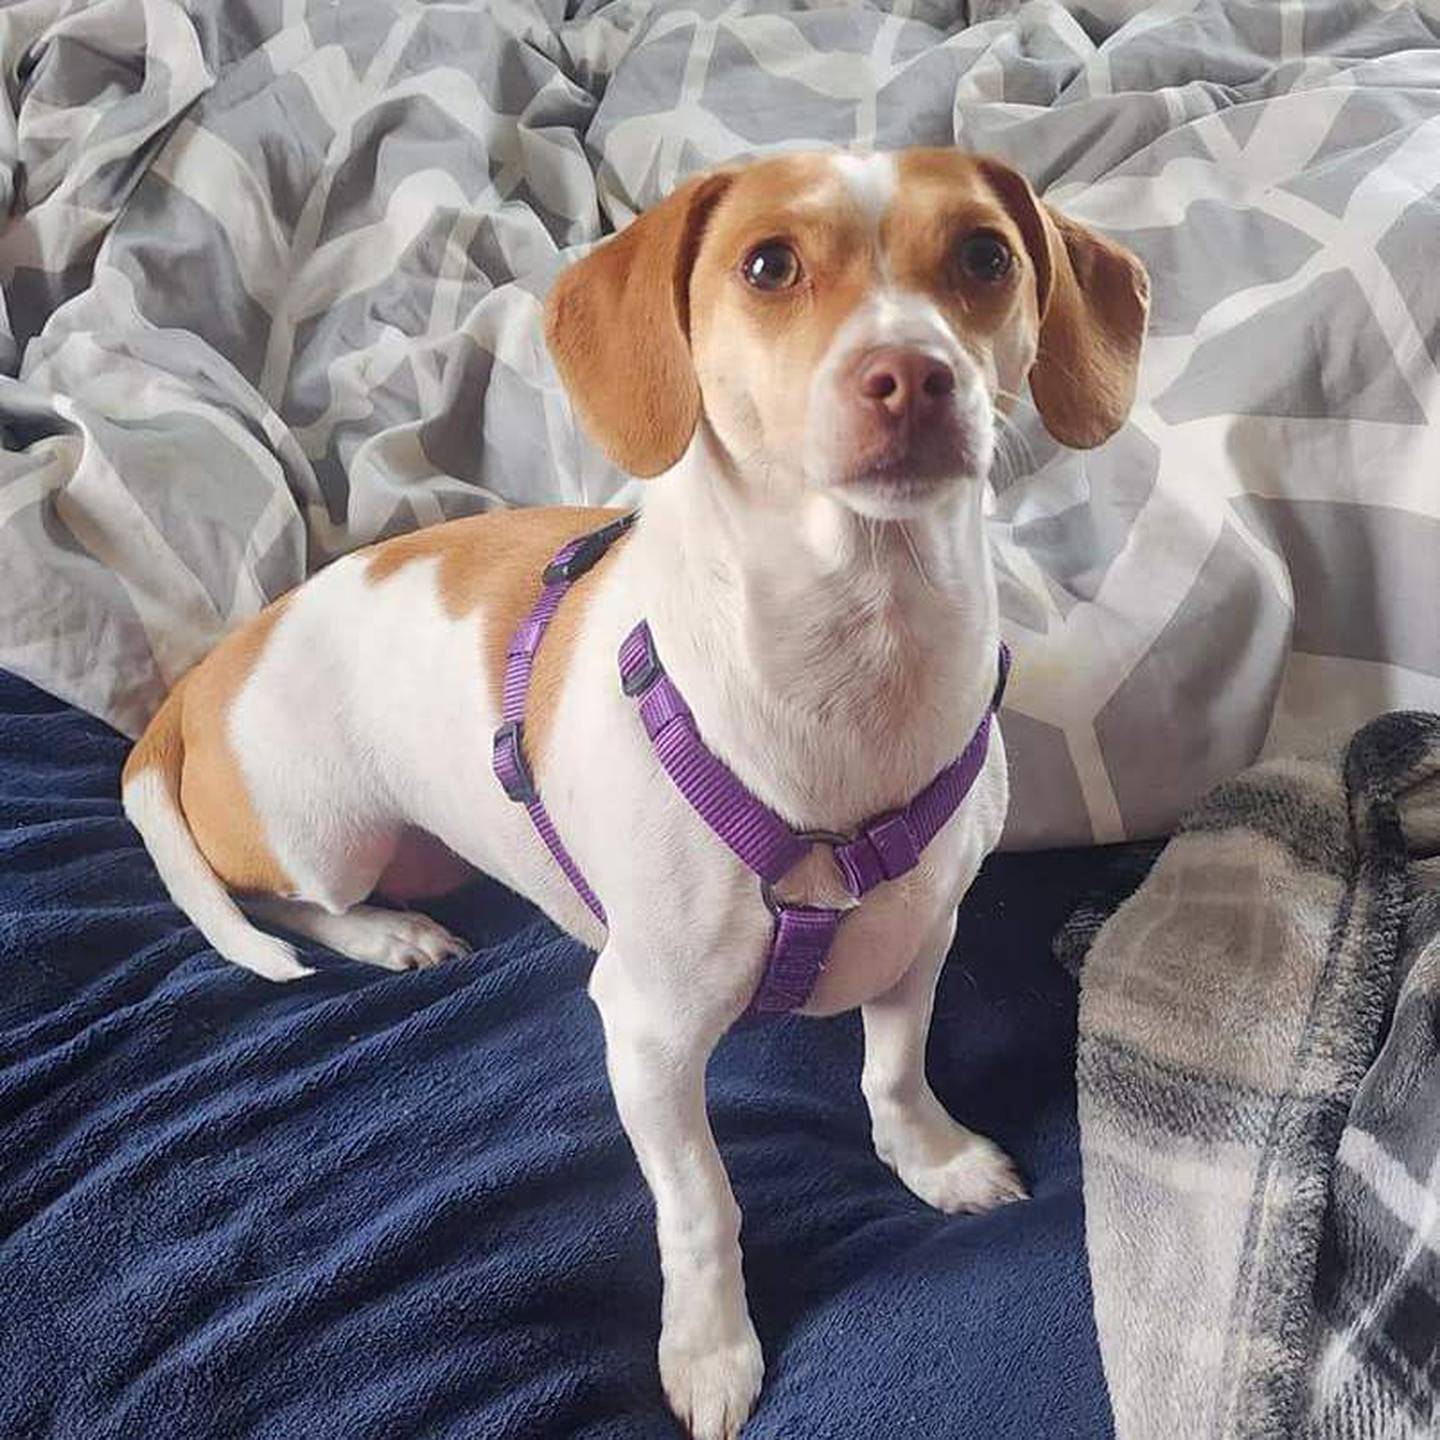 Chelly is a 3-year-old beagle and chihuahua.  She is sweet, calm, and energetic. Clementine is affectionate and enjoys neck scratches, but only on her own time. For more information on Chelly, including adoption fees please visit justanimals.org or call 815-448-2510.